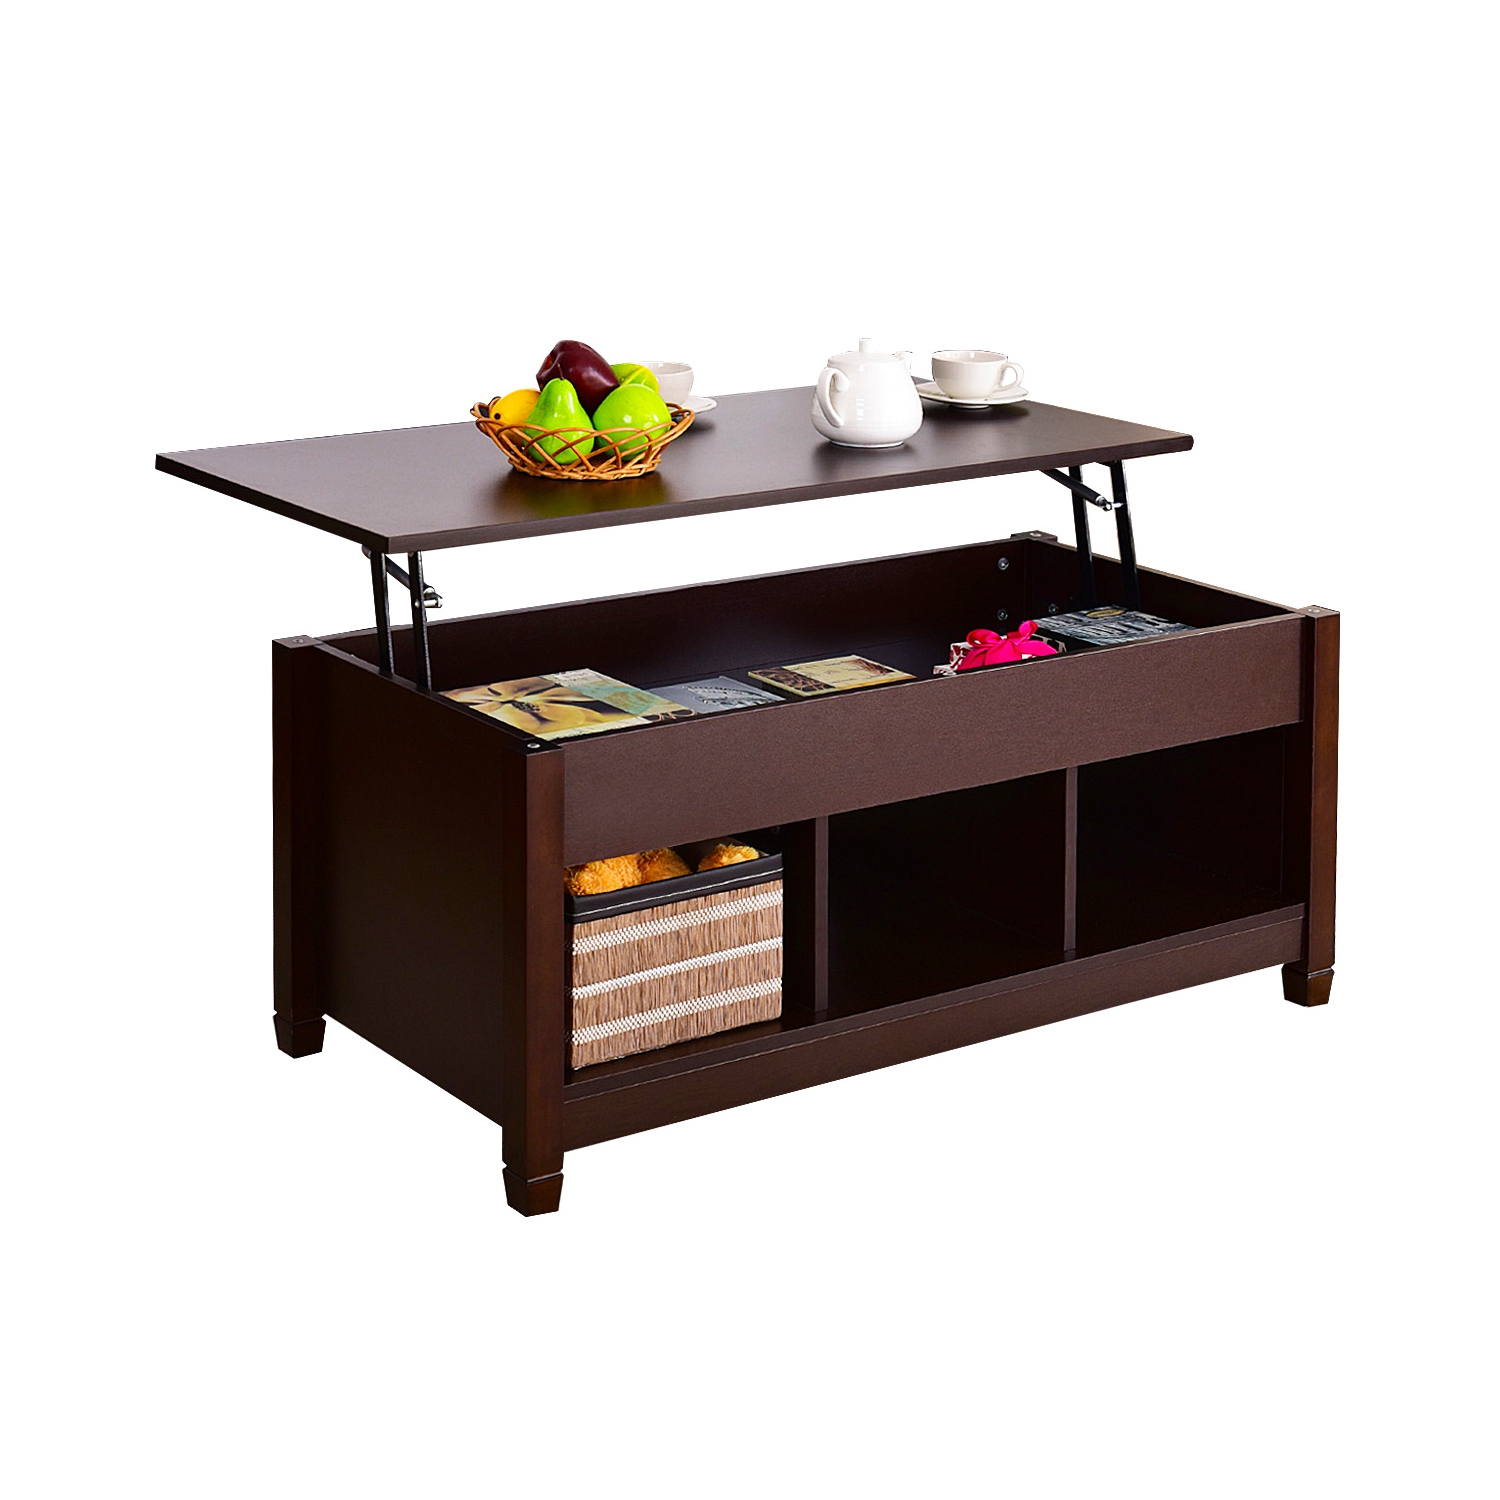 Topbuy Multifunctional Modern Lift Top Coffee Table Desk Dining Furniture For Home, Living Room, Decor